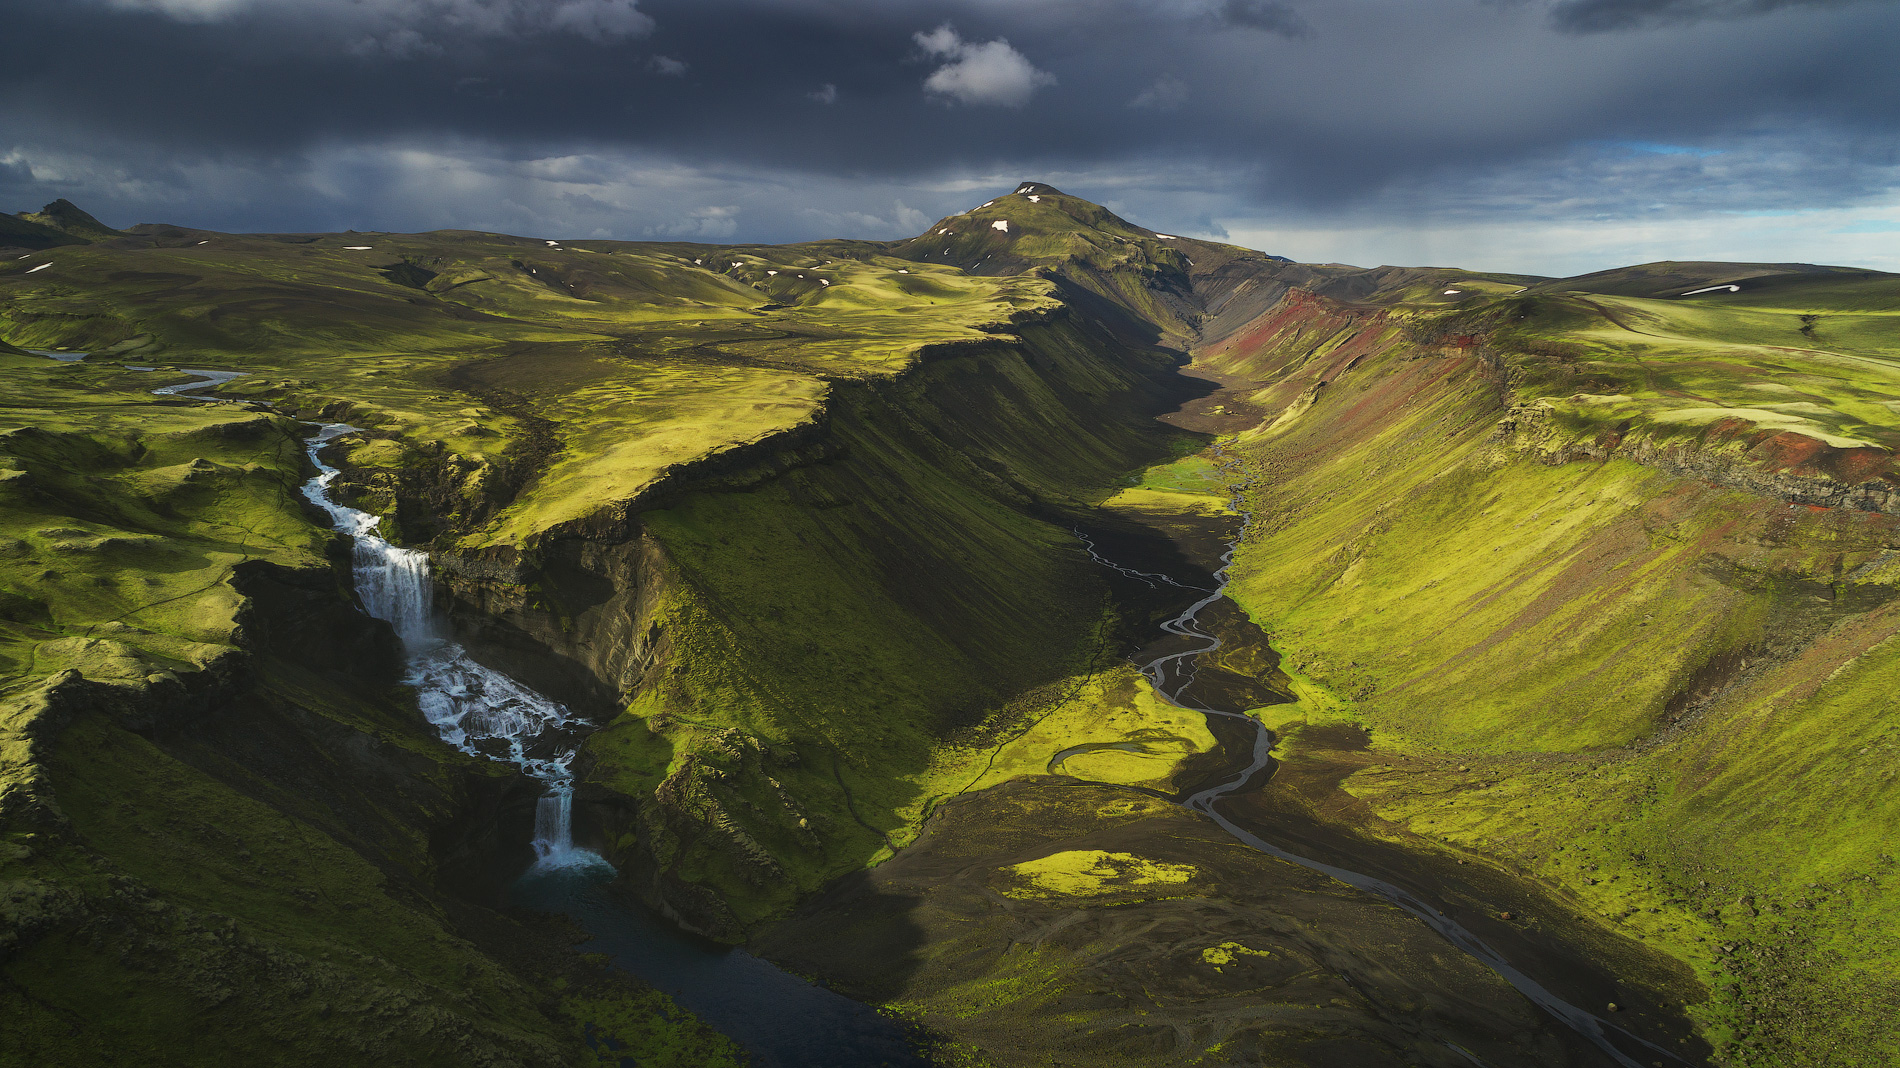 Þórsmörk is one of the most beautiful and popular valleys in the Icelandic highlands.